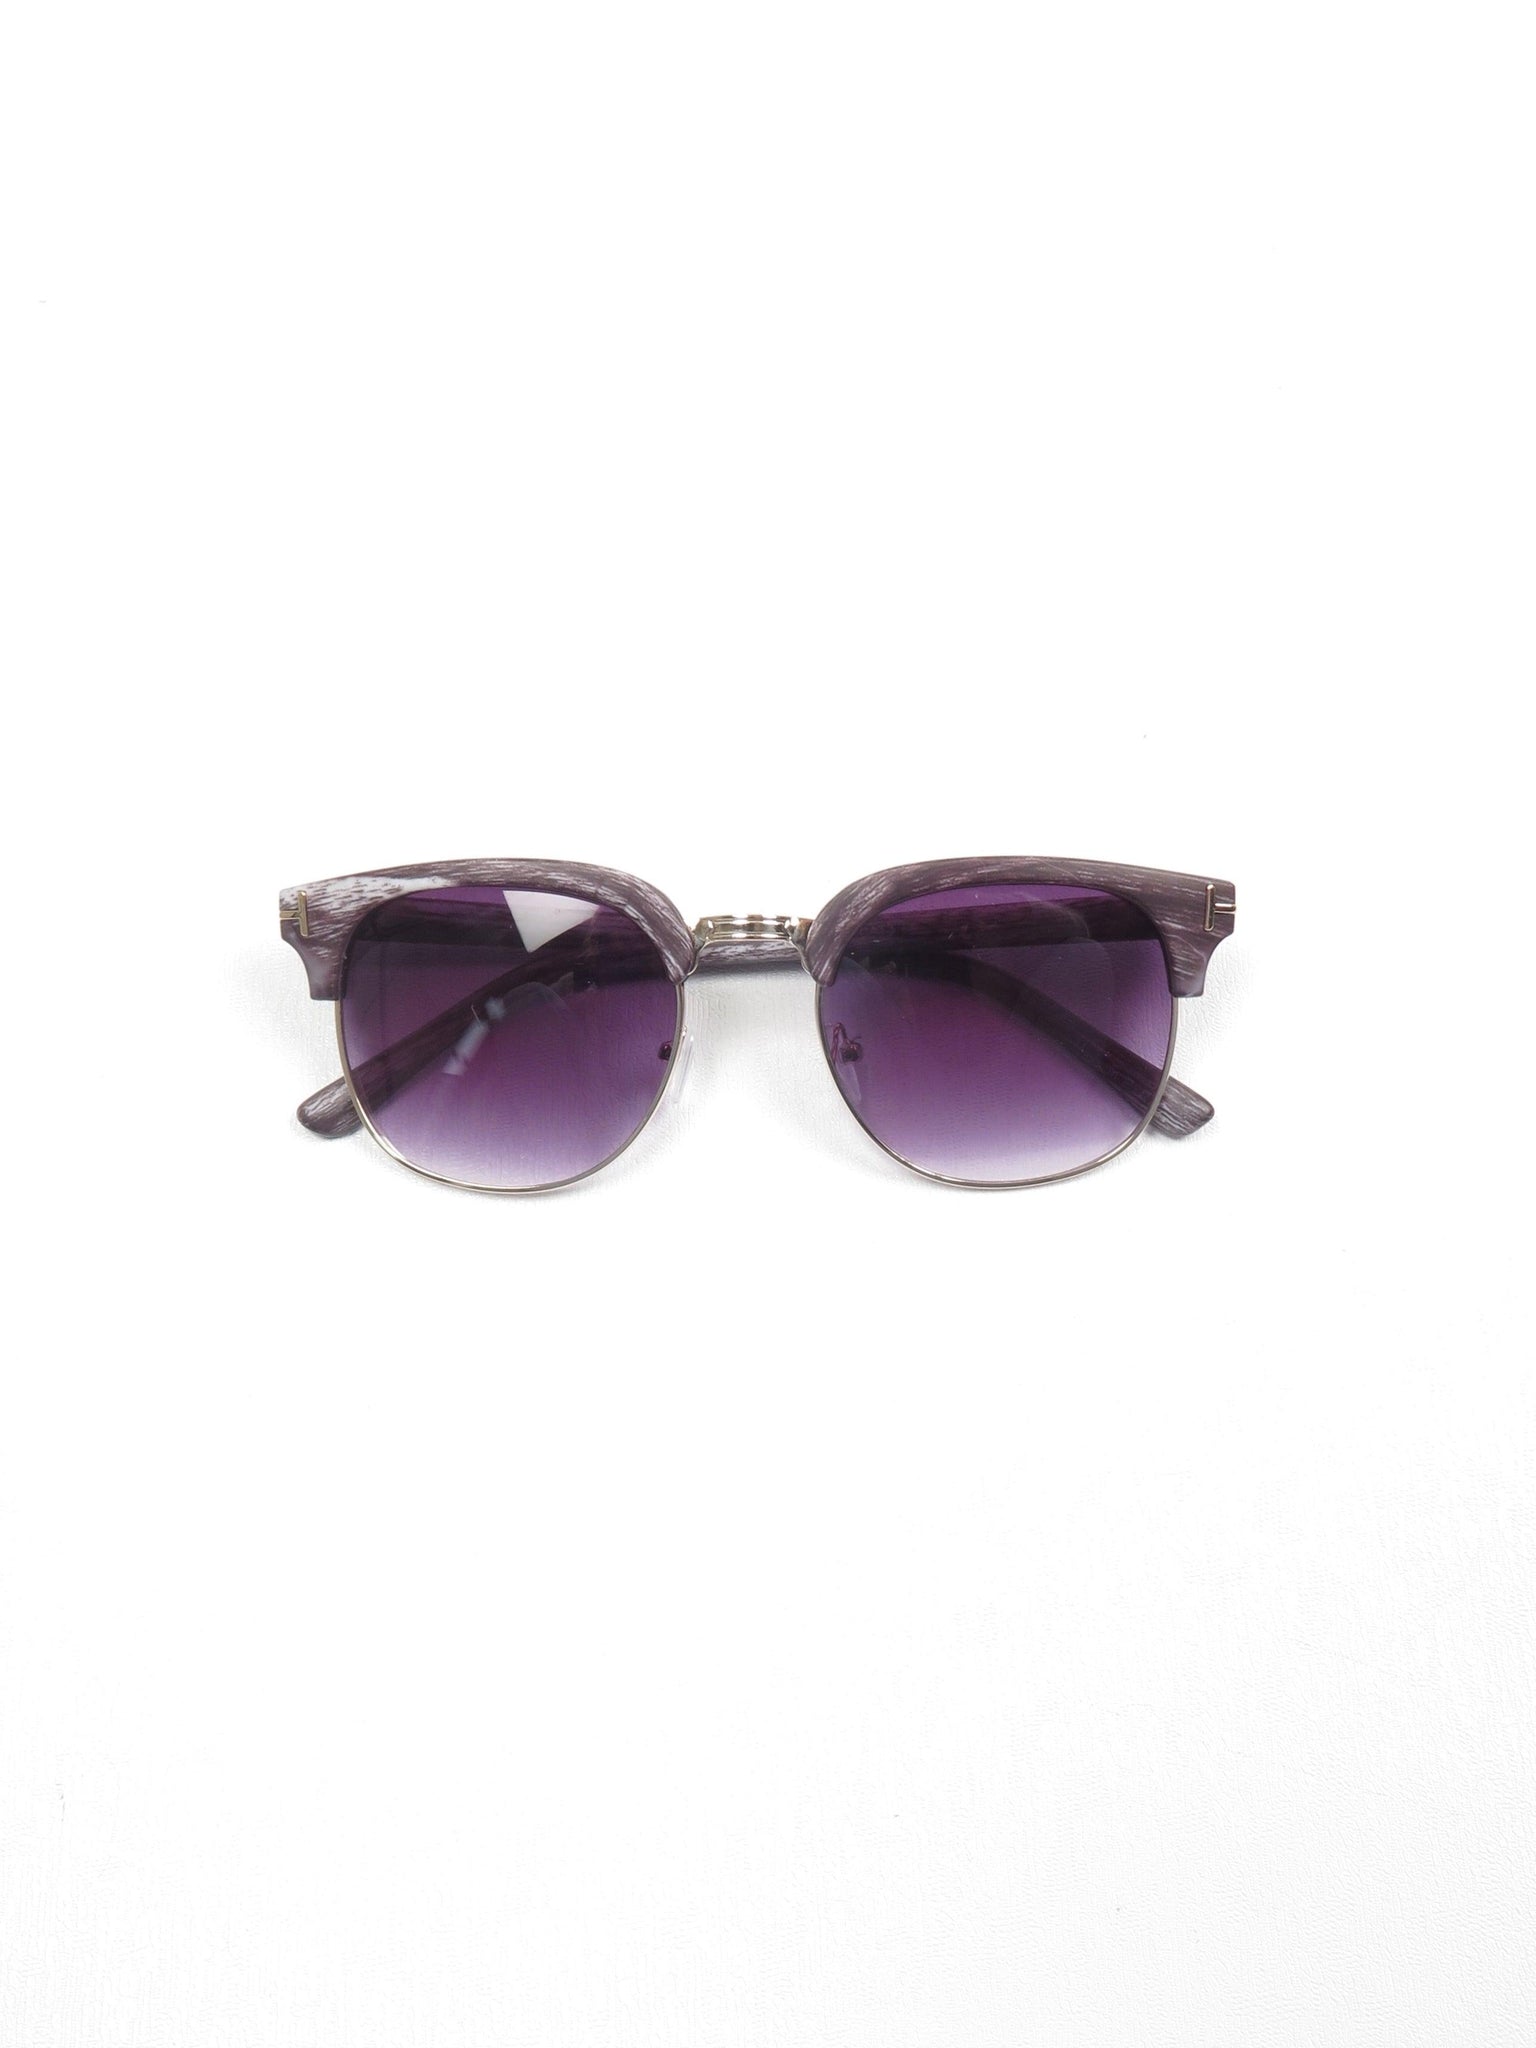 Club-master Style Sunglasses With Different Frames - The Harlequin